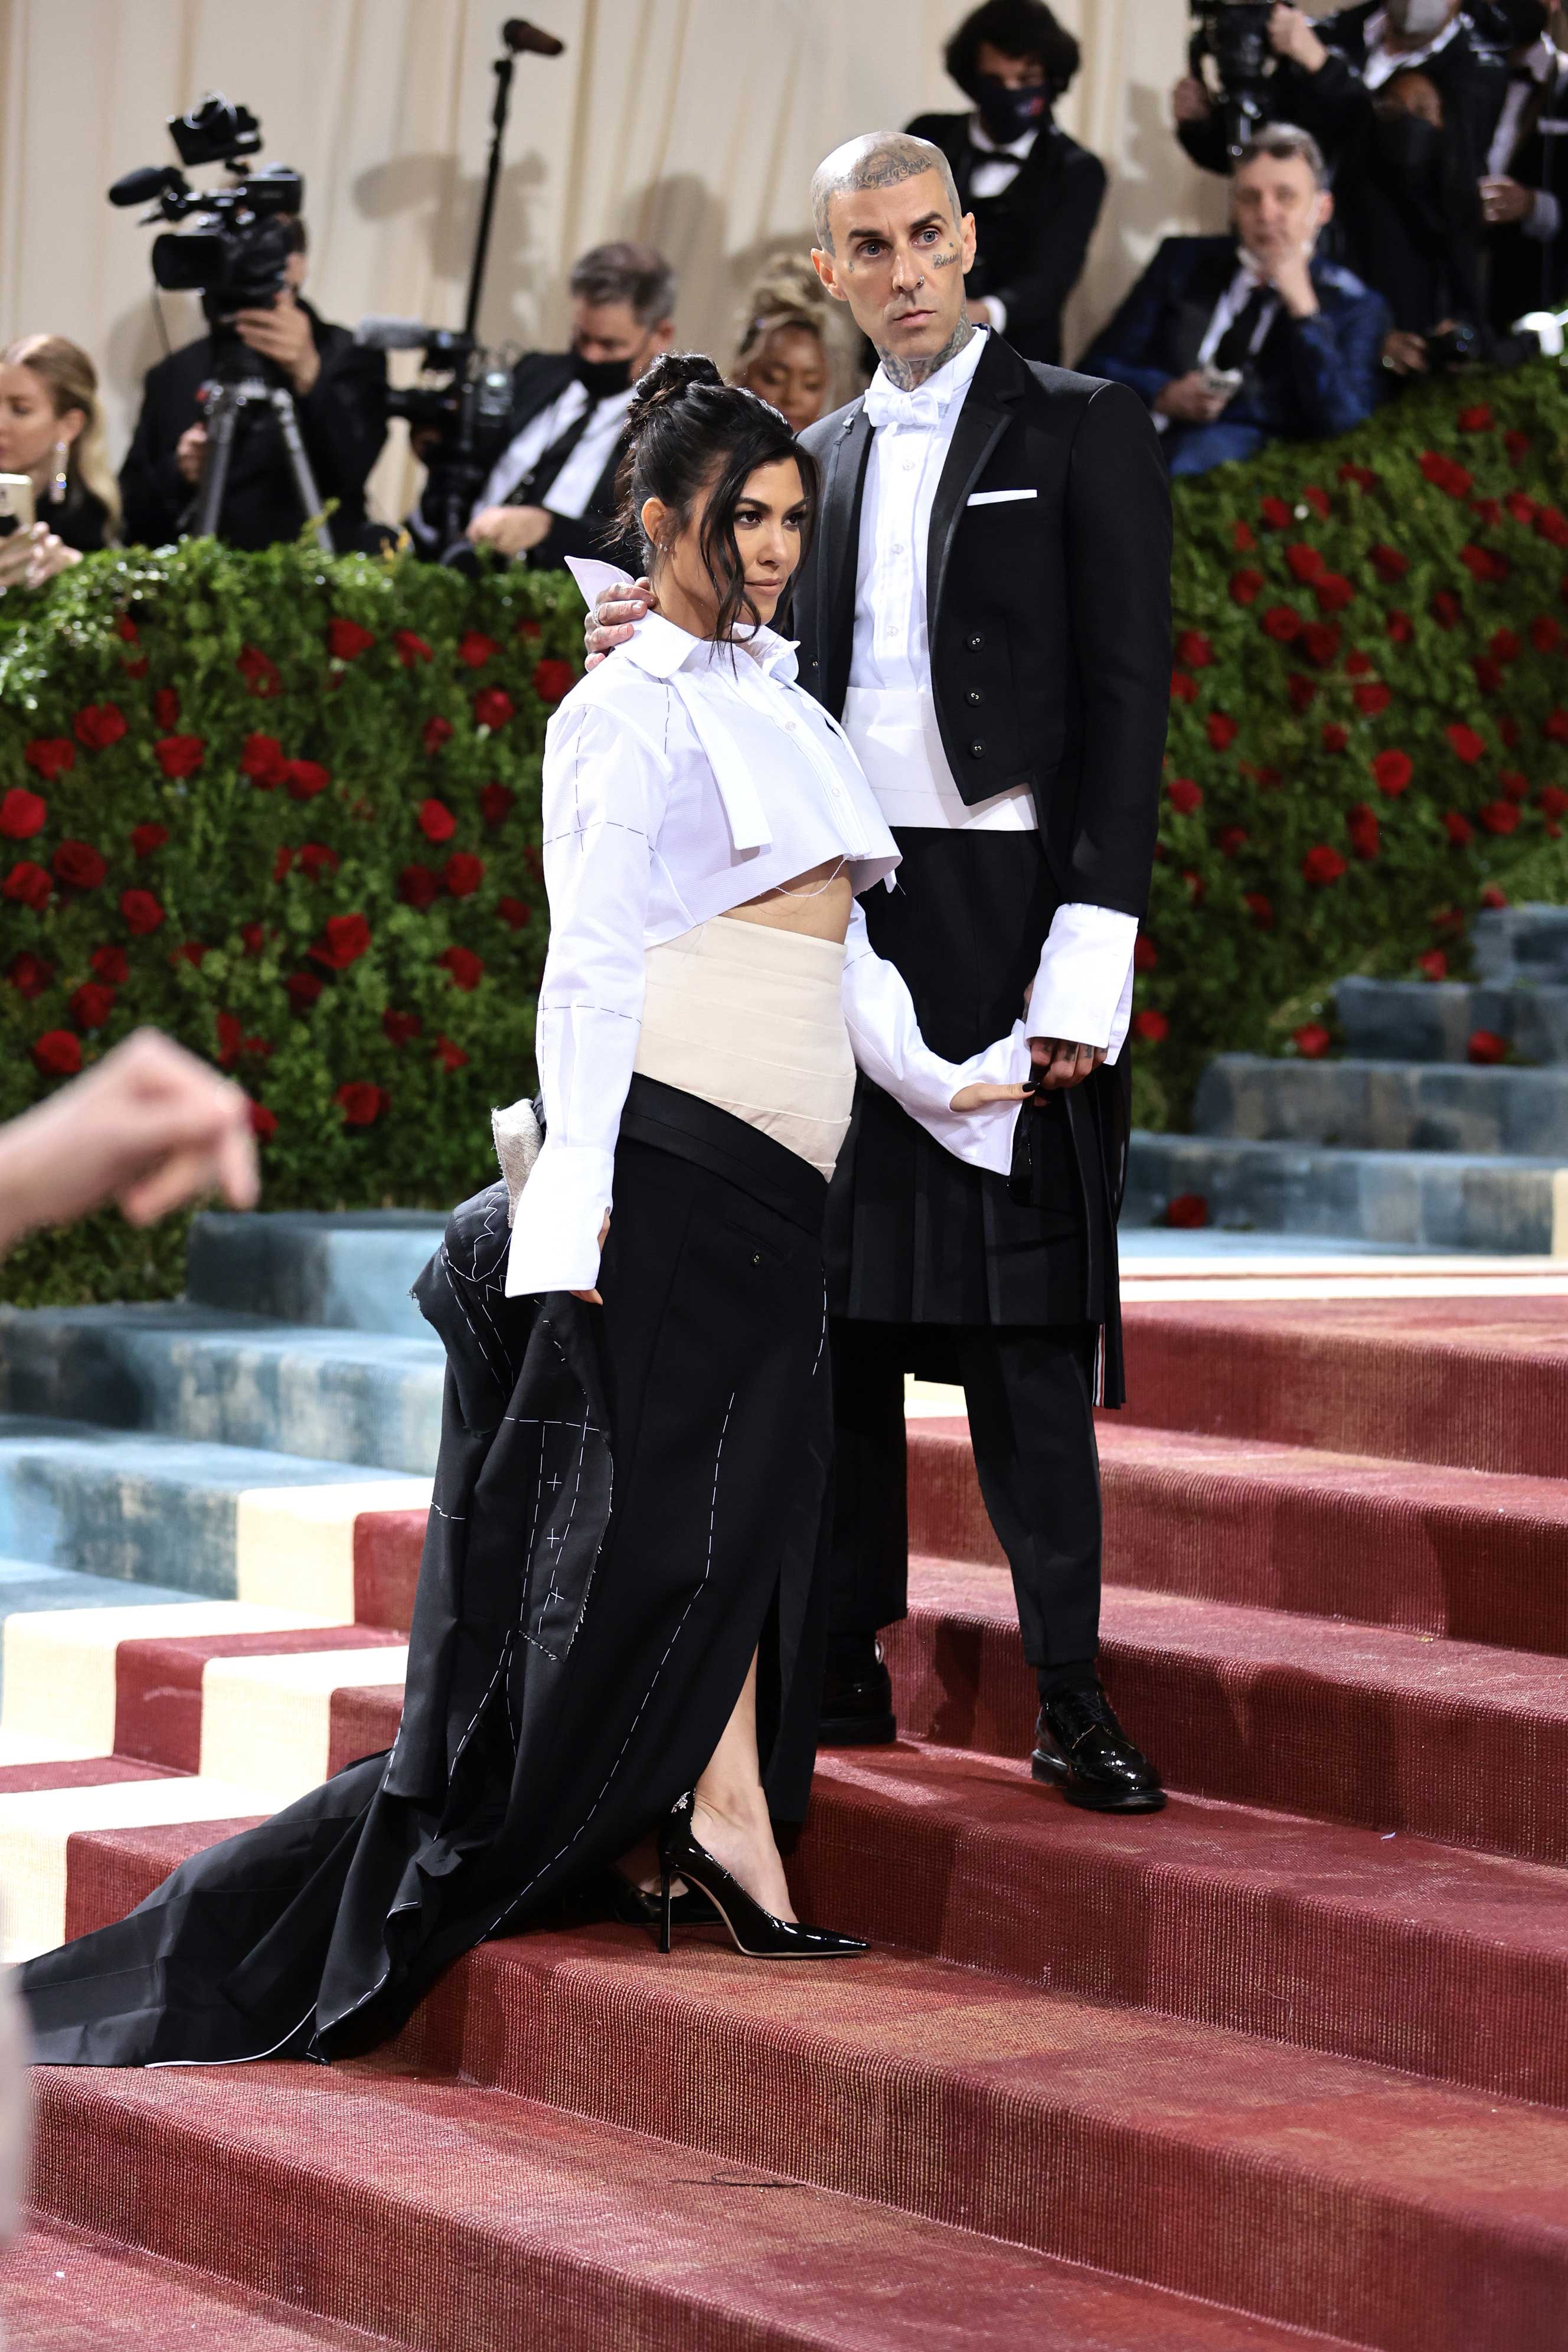 The Kardashians Took Over the 2022 Met Gala Red Carpet